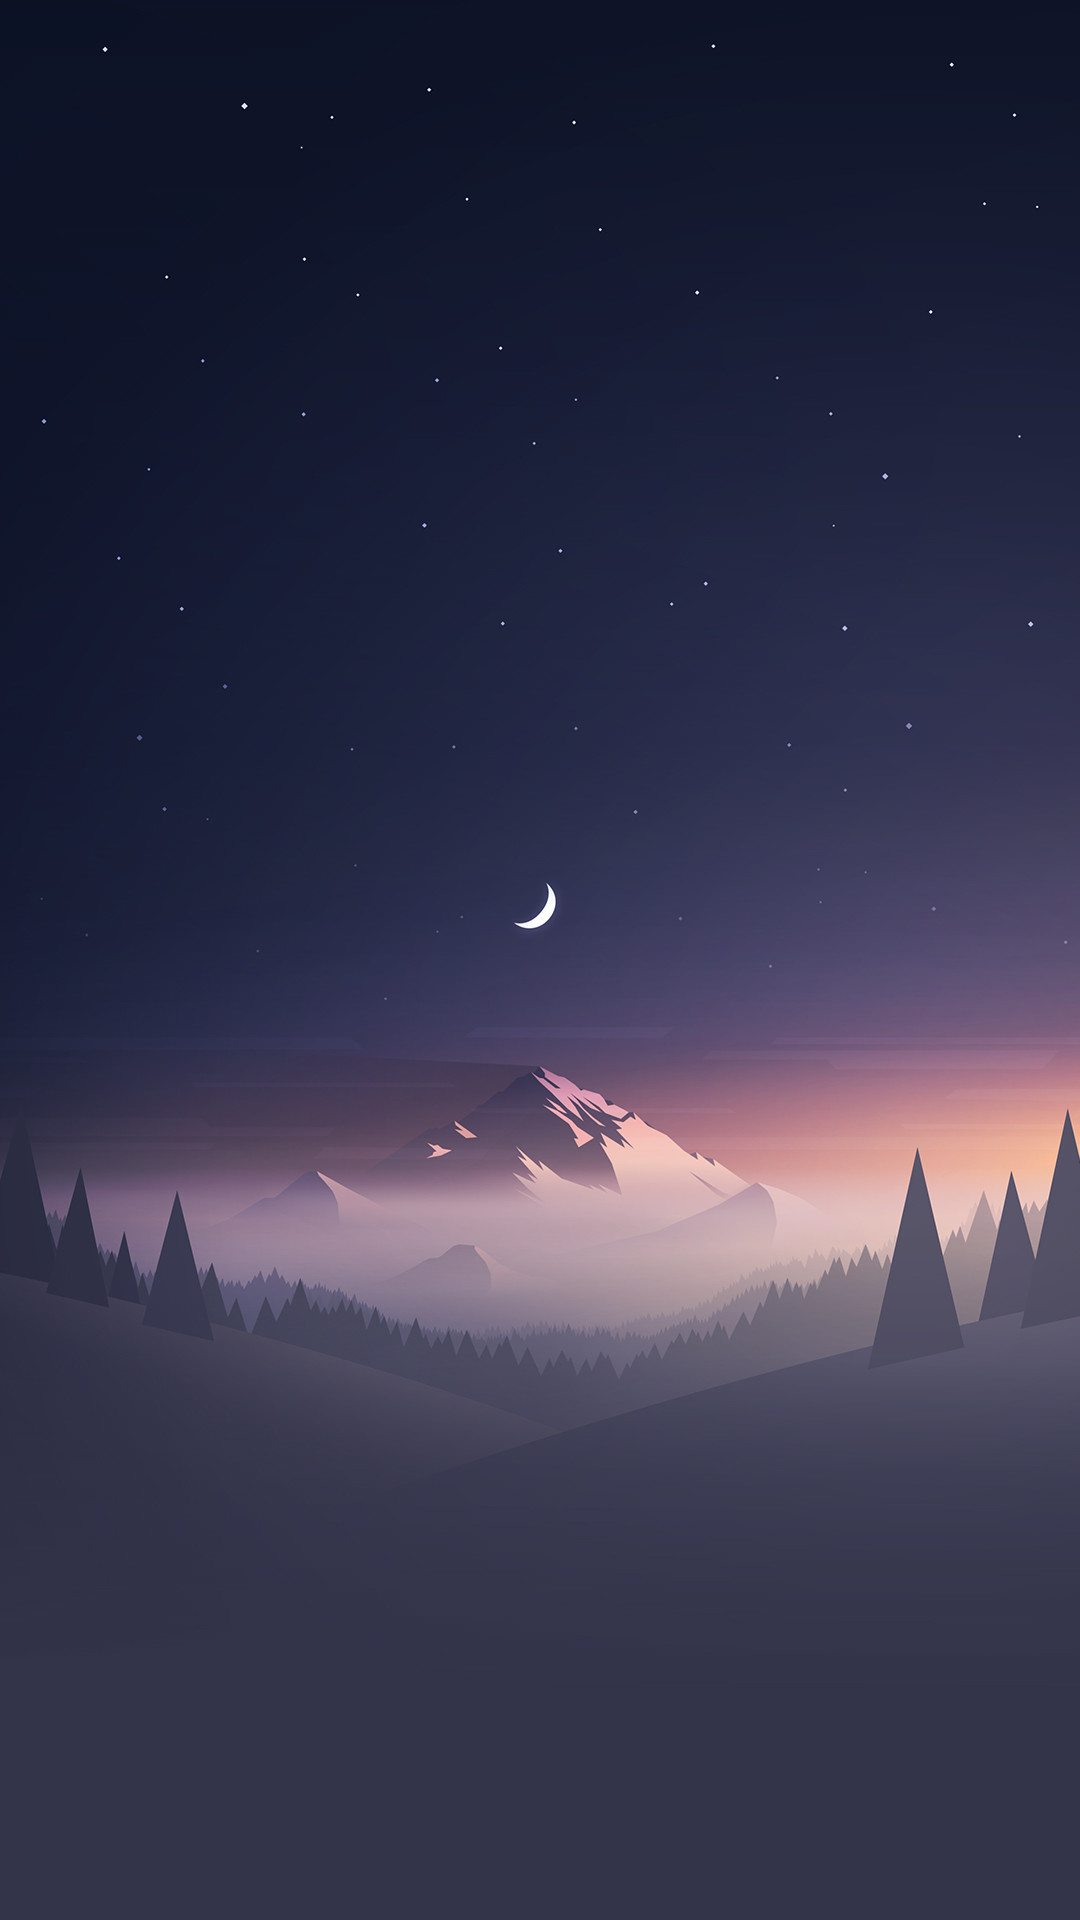 1080x1920 Stars And Moon Winter Mountain Landscape #iPhone #6 #wallpaper